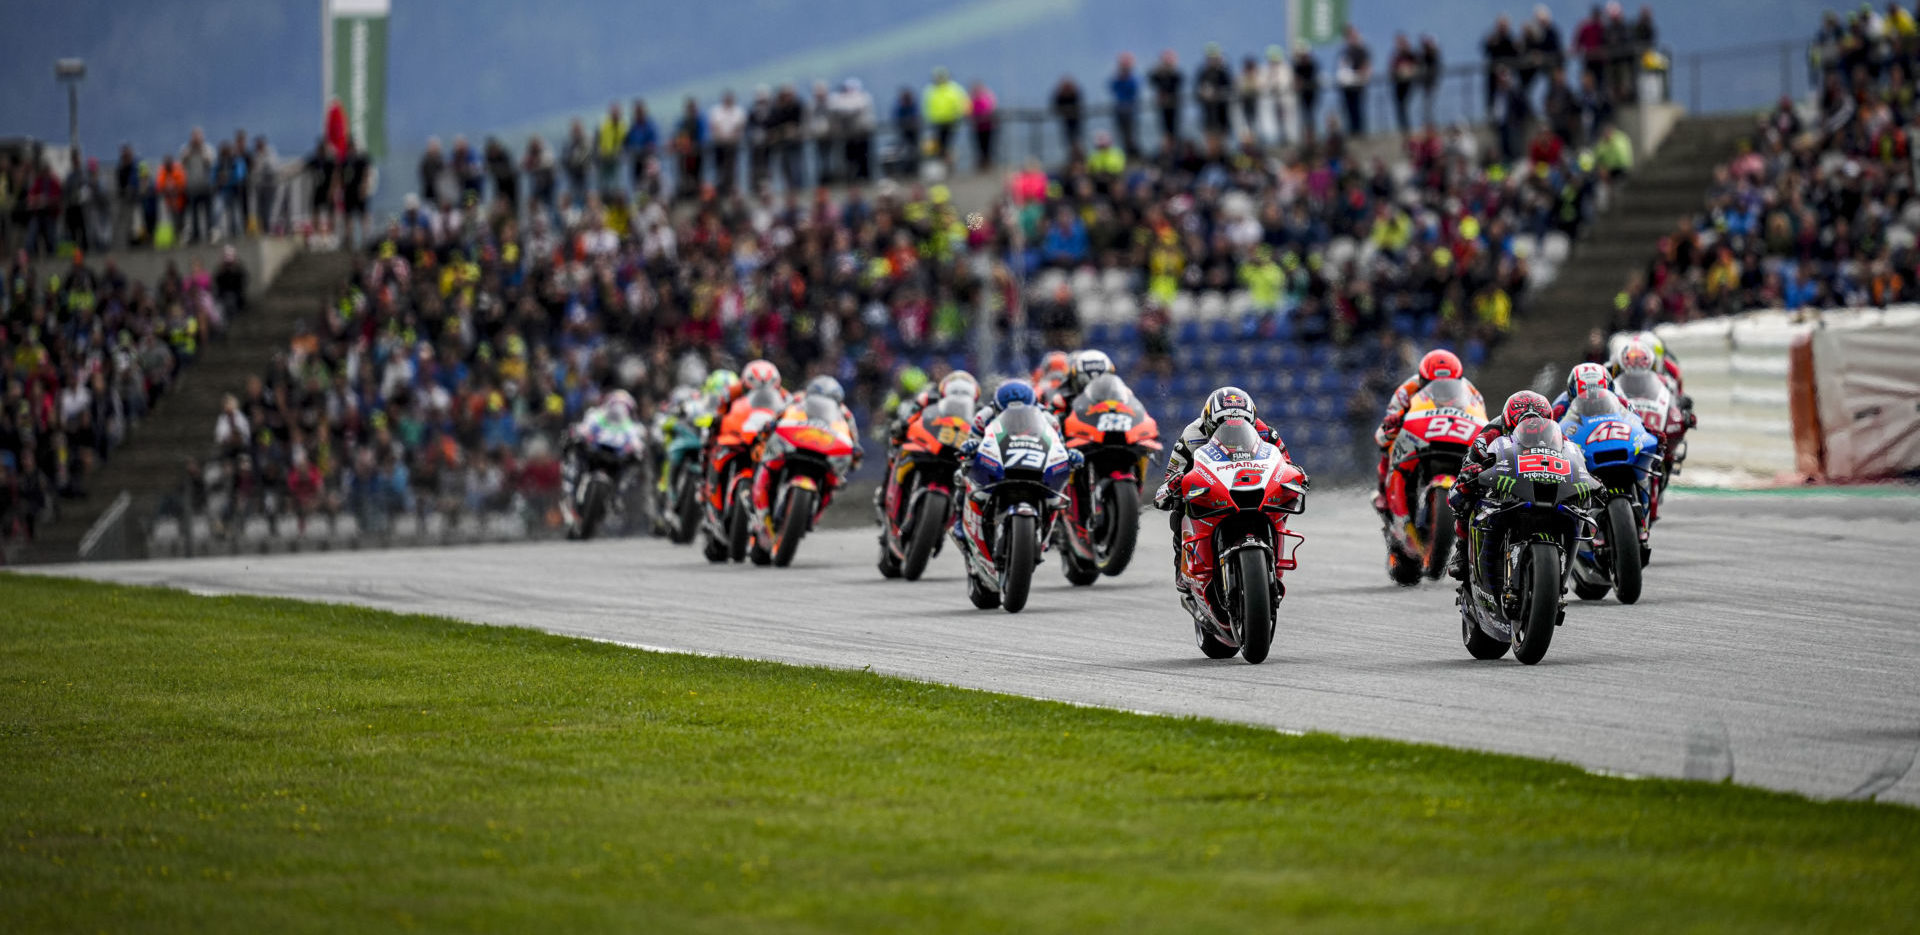 Action from the MotoGP race August 8 at the Red Bull Ring, in Austria. Photo courtesy Monster Energy Yamaha.